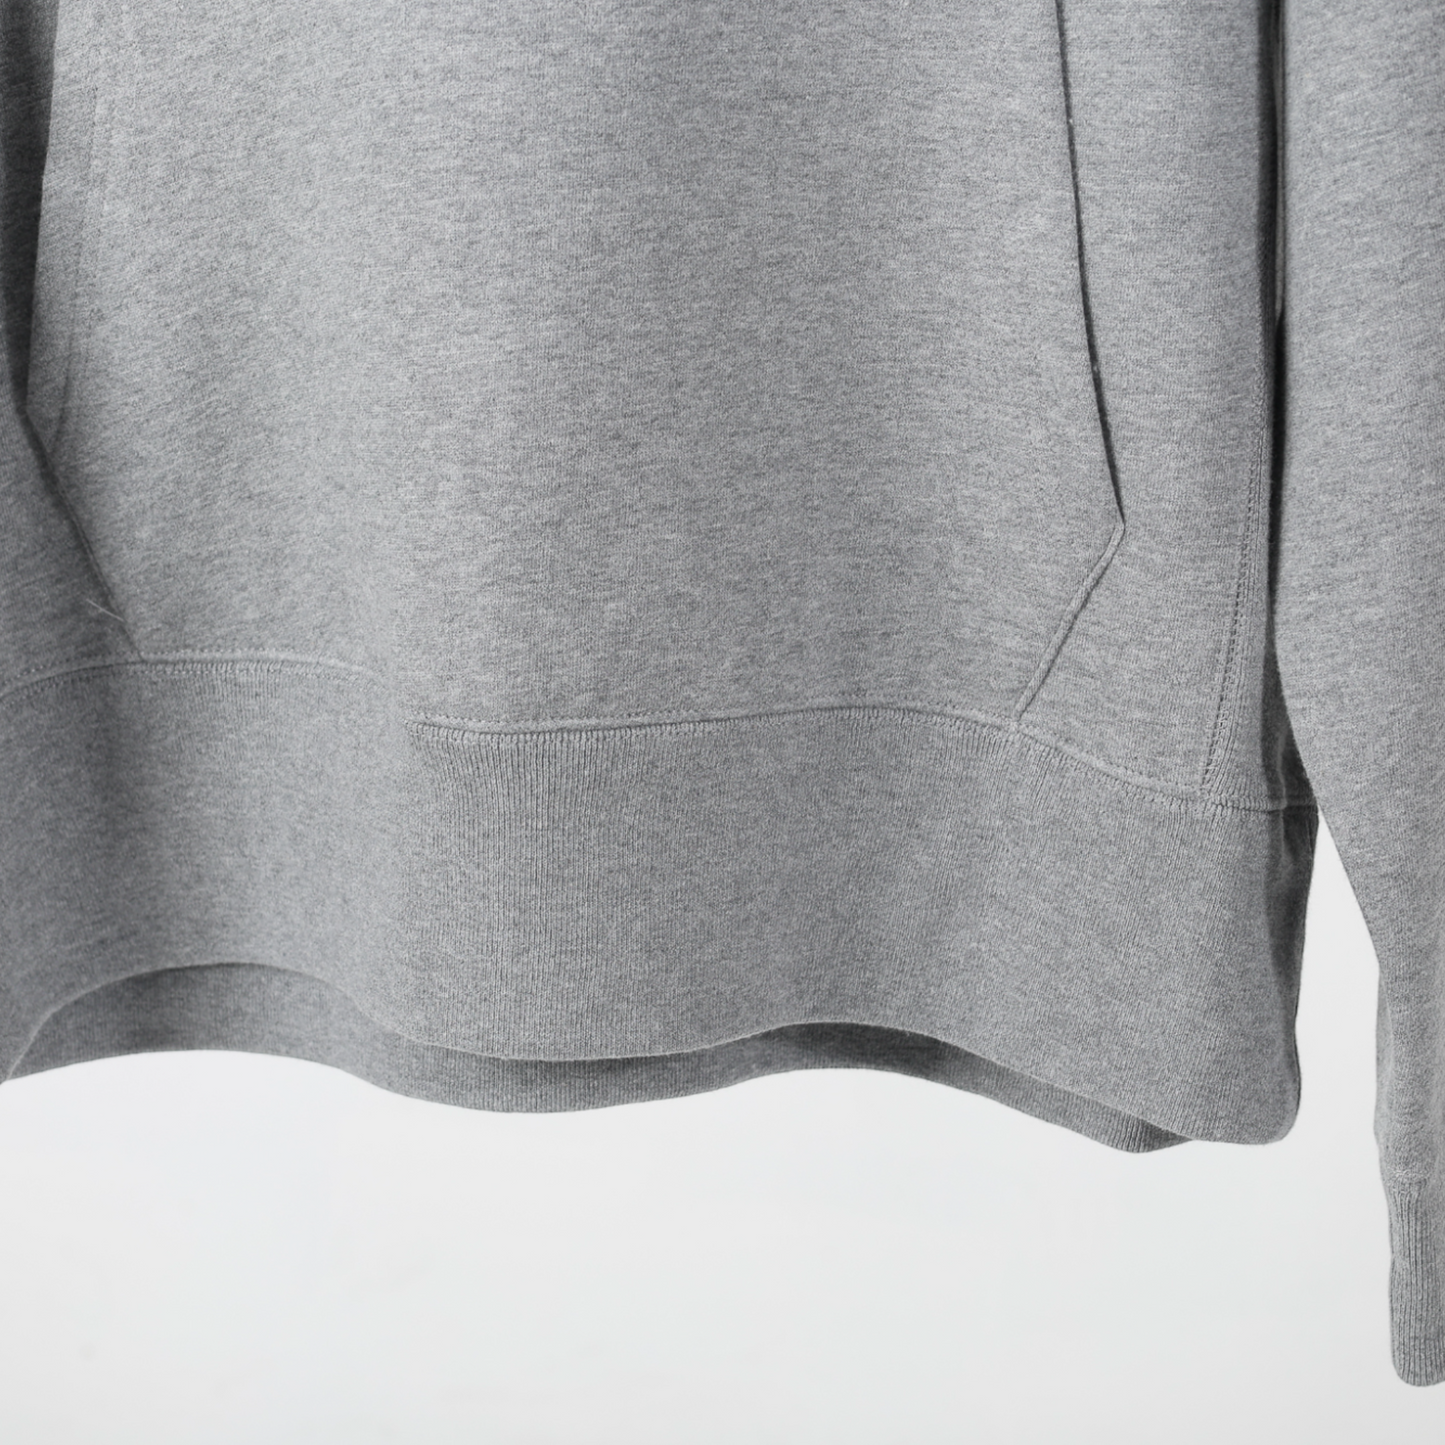 Pro-Script HEAVY Pull Over Hooded Sweatshirt : GREY with Red